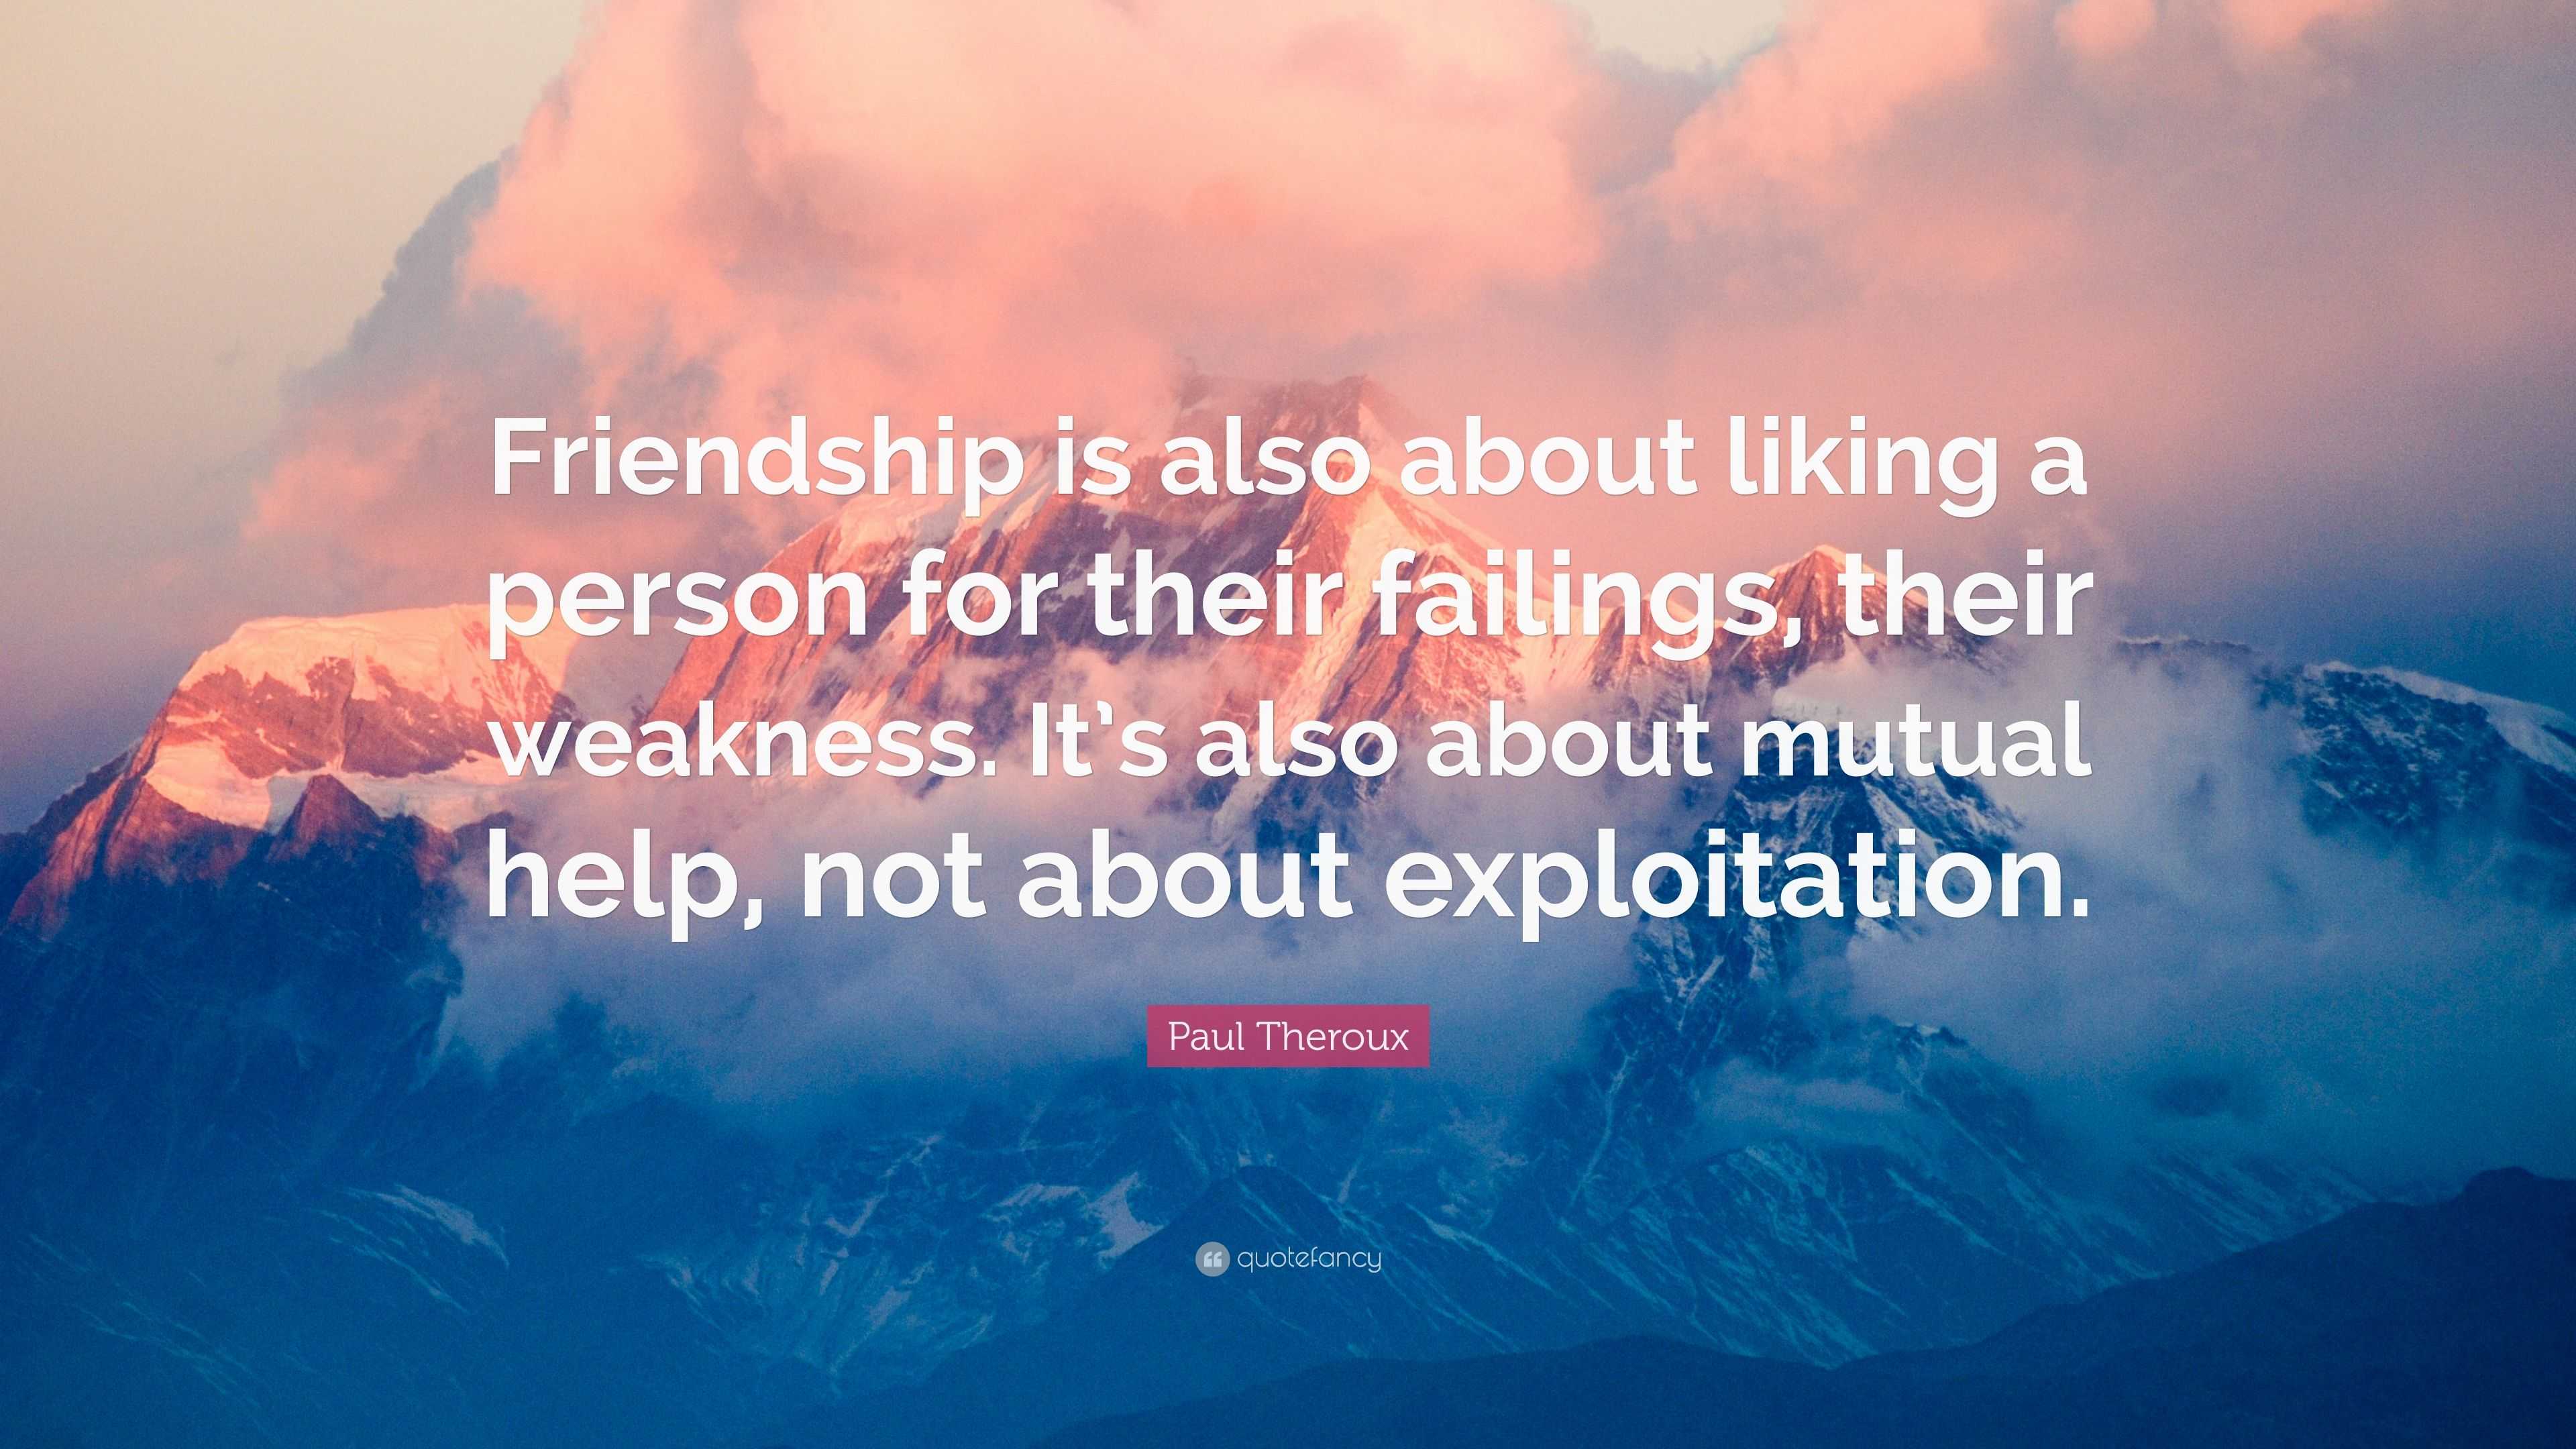 Paul Theroux Quote: “Friendship is also about liking a person for their ...